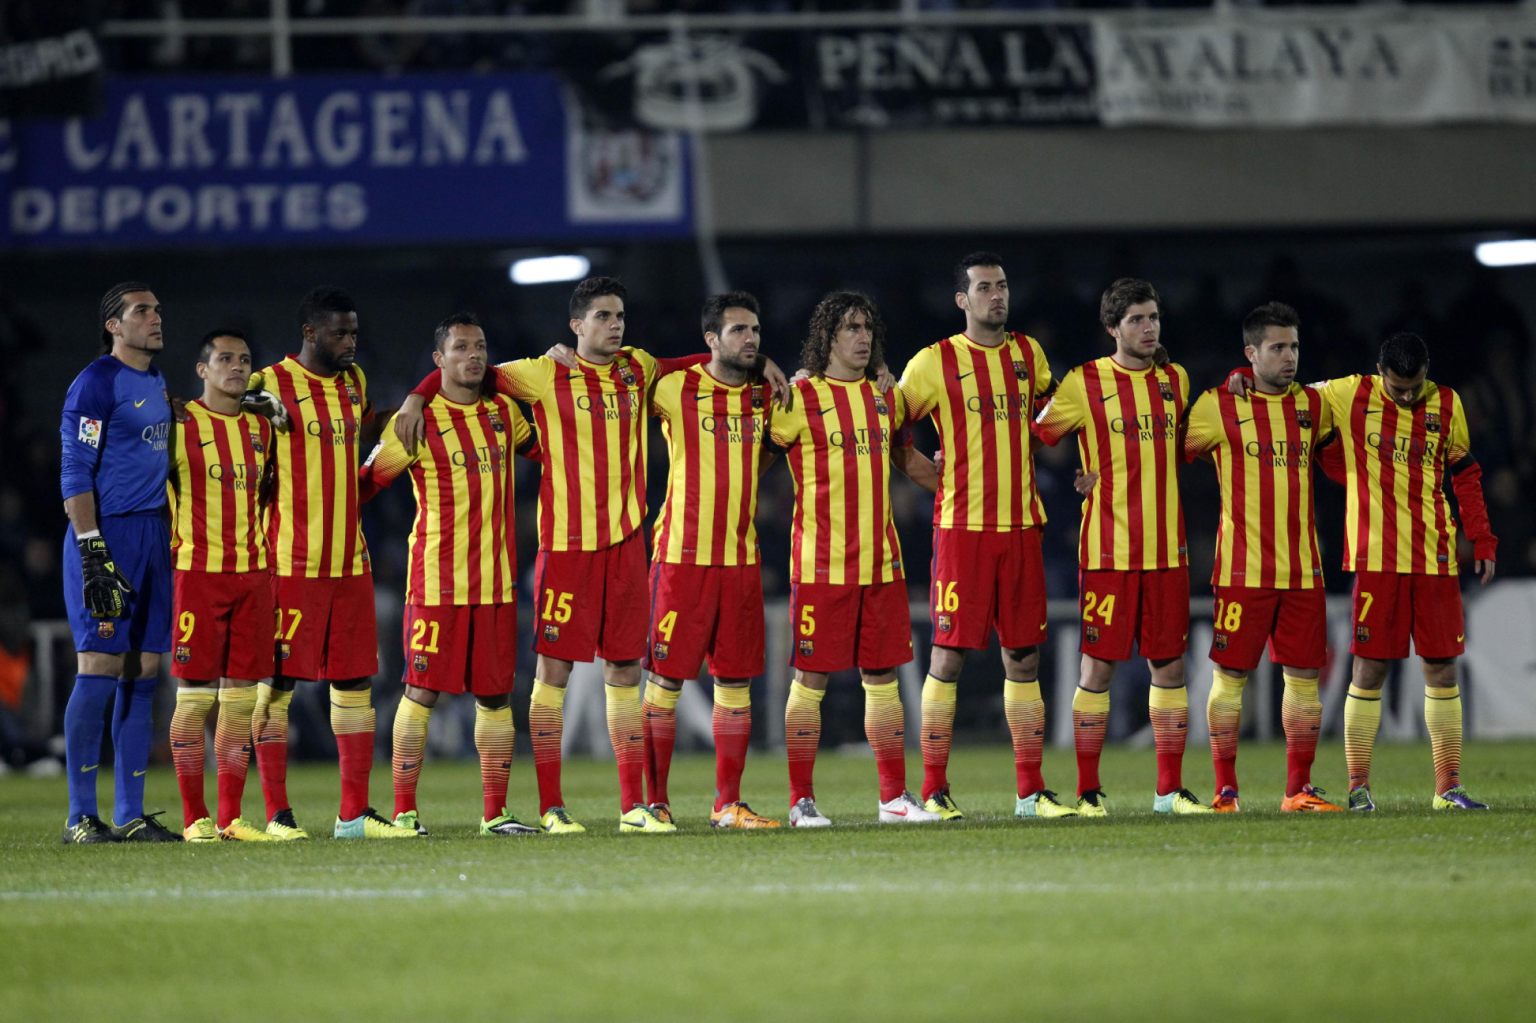 Barcelona players honoring and respecting one minutes of silence for Nelson Mandela